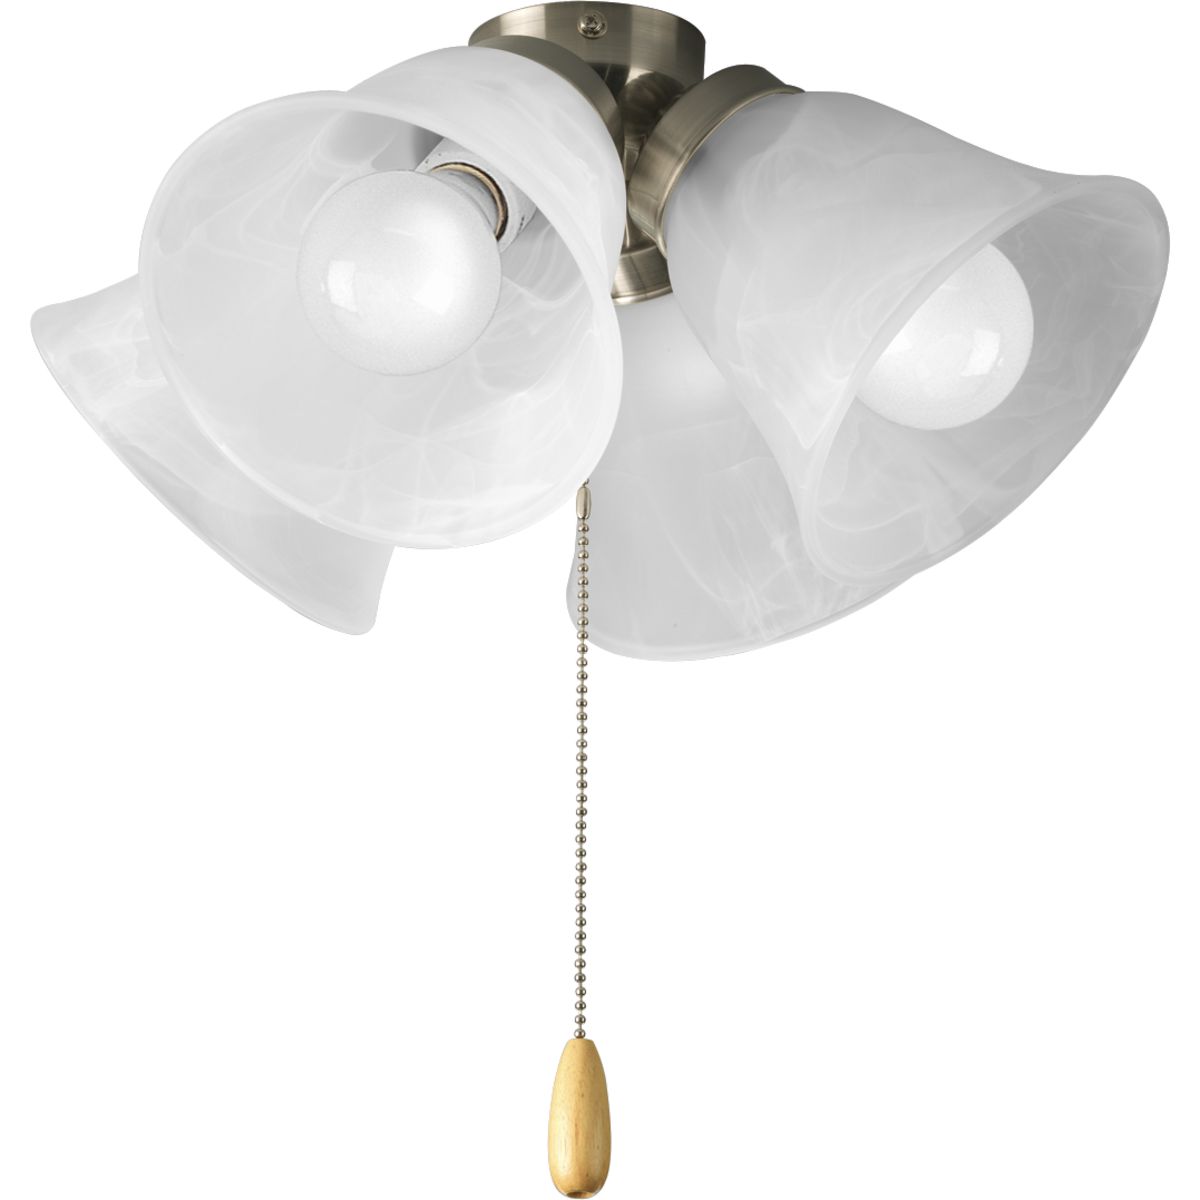 Four-light universal fan light kit features alabaster style glass shades beautiful in design. Brushed Nickel finish corresponds with a Chrome pull-chain and maple fob. Universal style for use with fans that accept an accessory light comes with quick-connect wiring. Includes four 3000K, 800 lumen each (source), Title 24 certified LED bulbs.